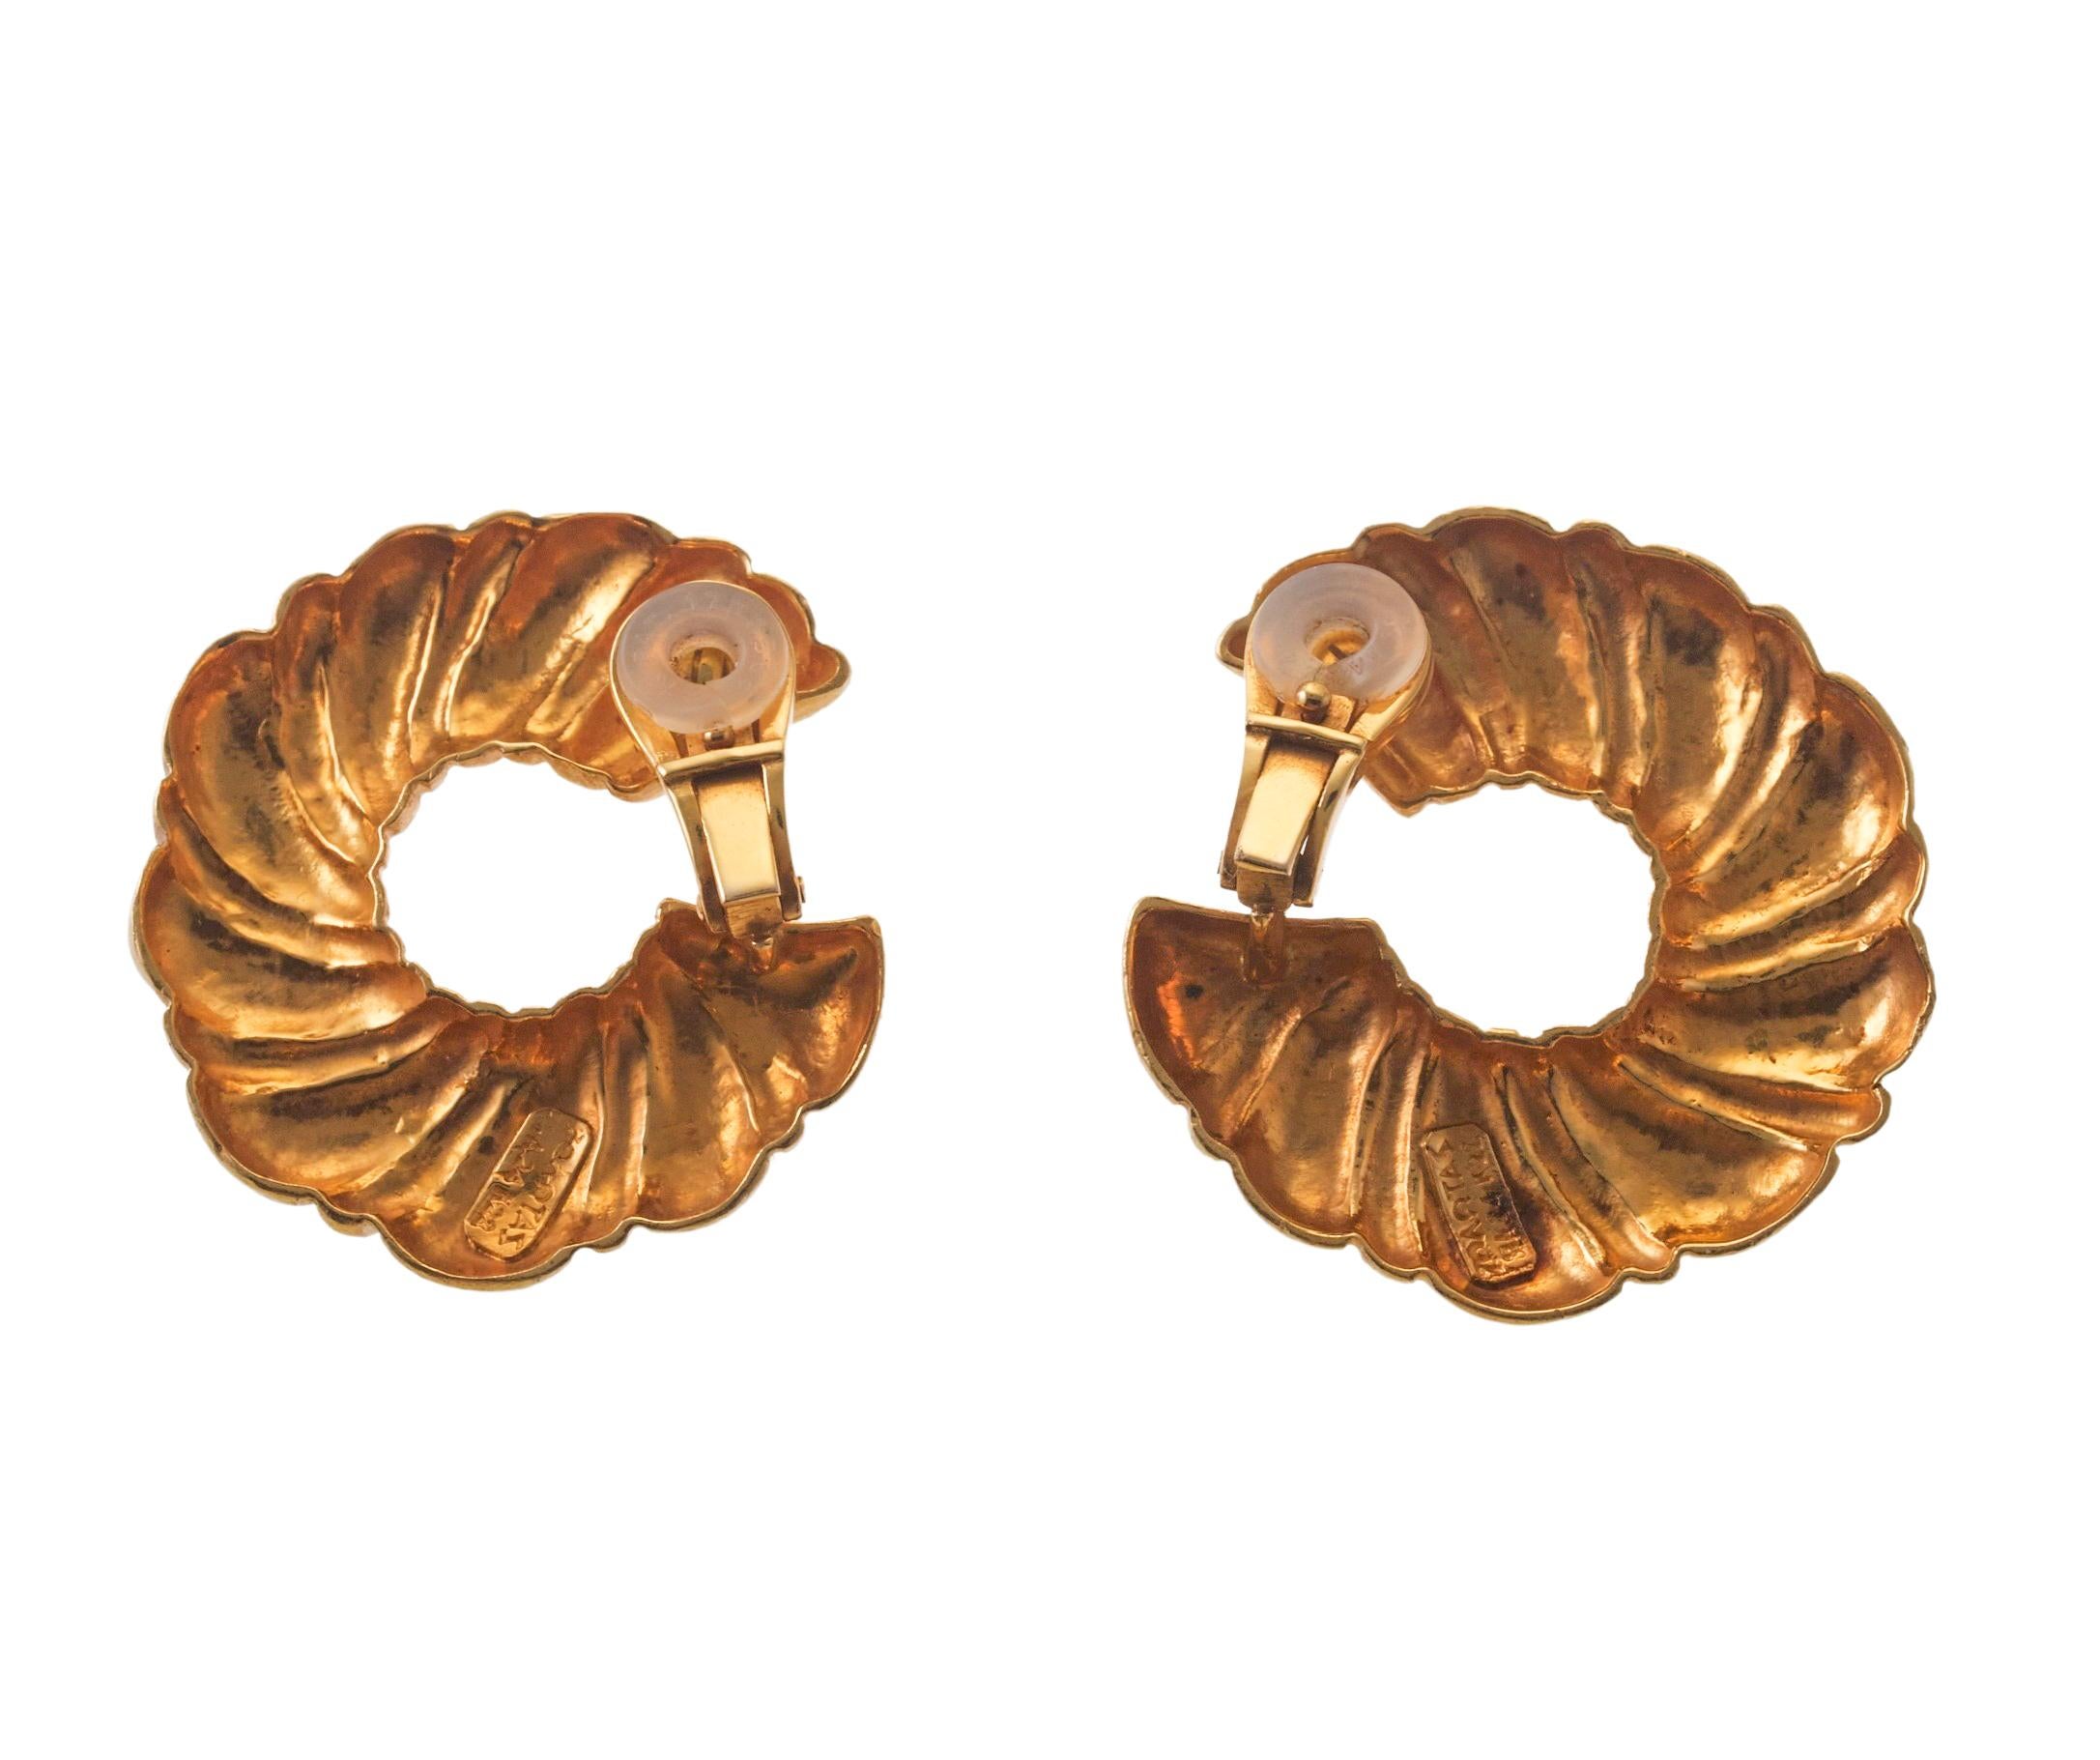 Pair of 22k gold earrings by Zolotas of Greece, come with pouch. Earrings measurements are 36mm in diameter. Marked: Zolotas, k22, A24. Weight is 30.0 grams. 